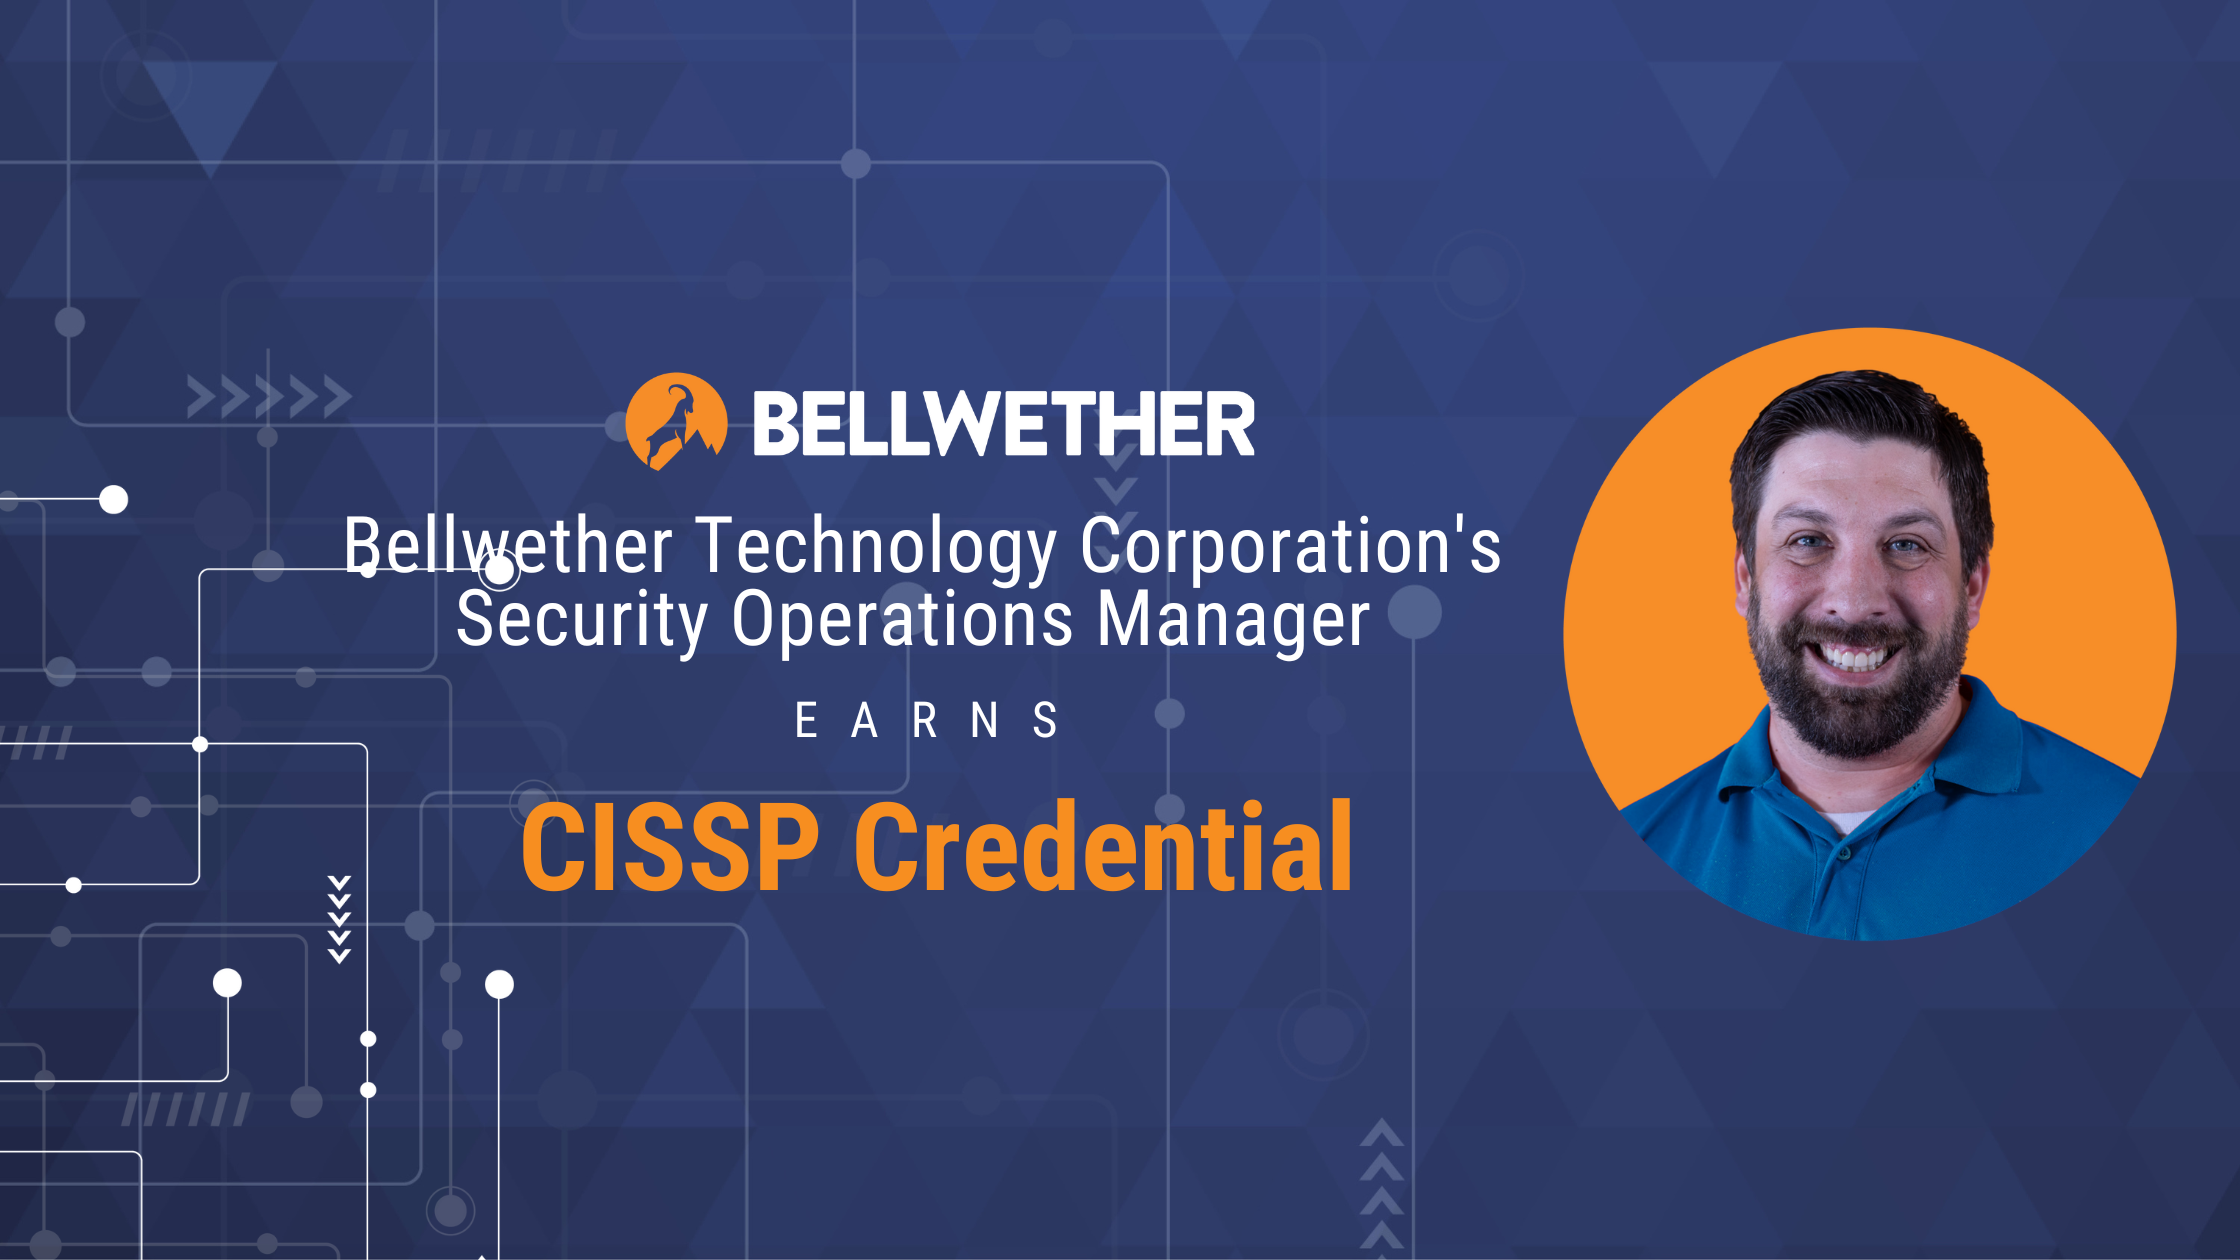 Bellwether Technology Corporation’s Security Operations Manager Earns CISSP Credential